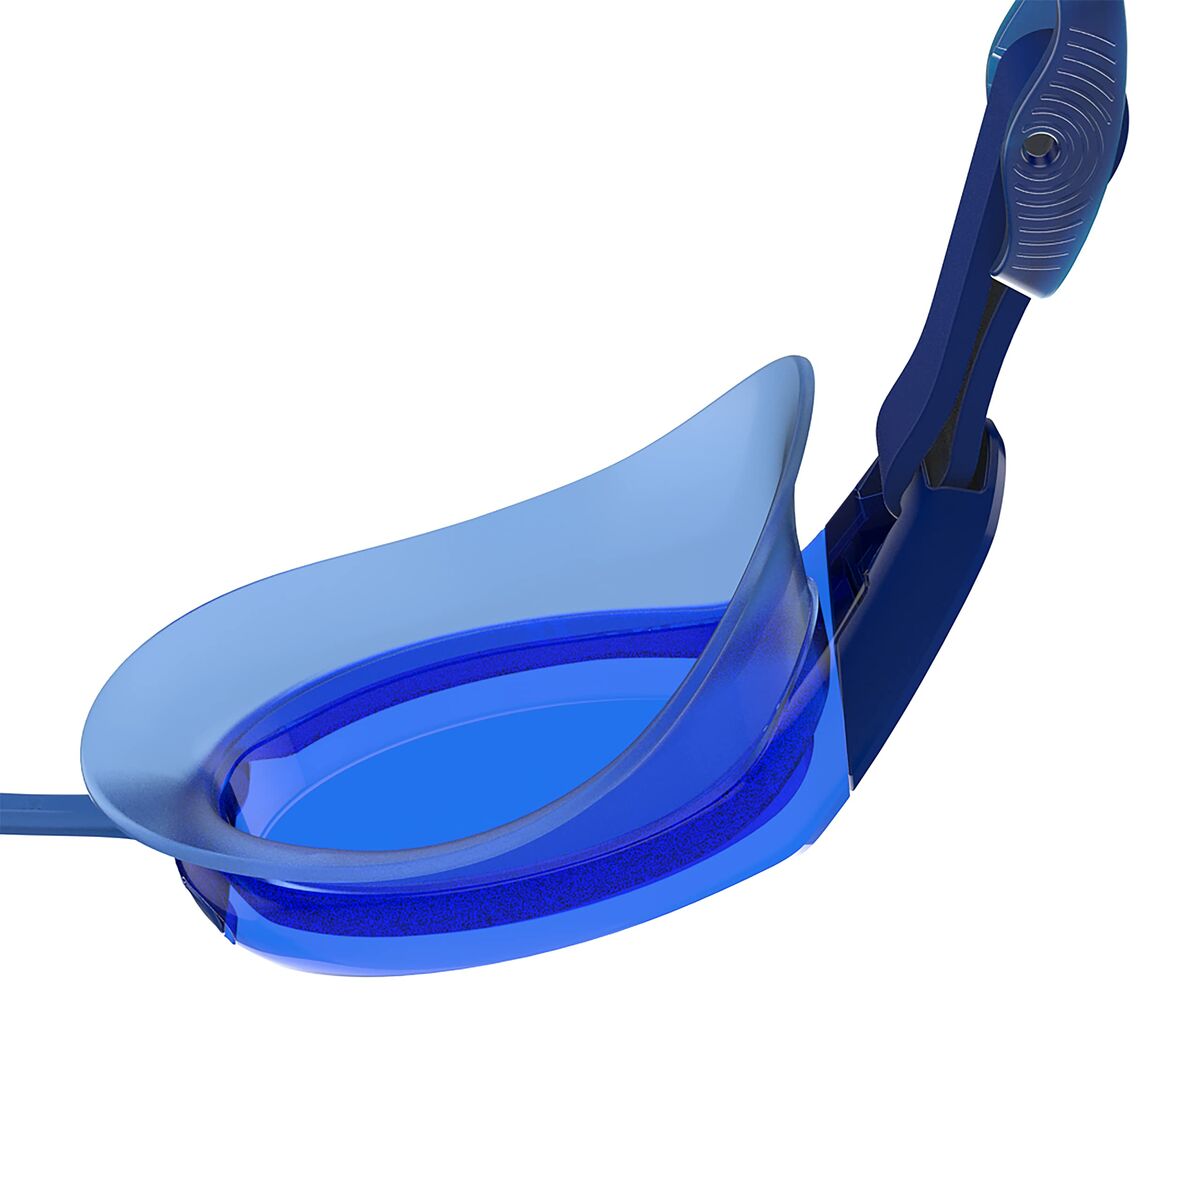 Swimming Goggles Speedo MARINER PRO 8-13534D665 Blue One size